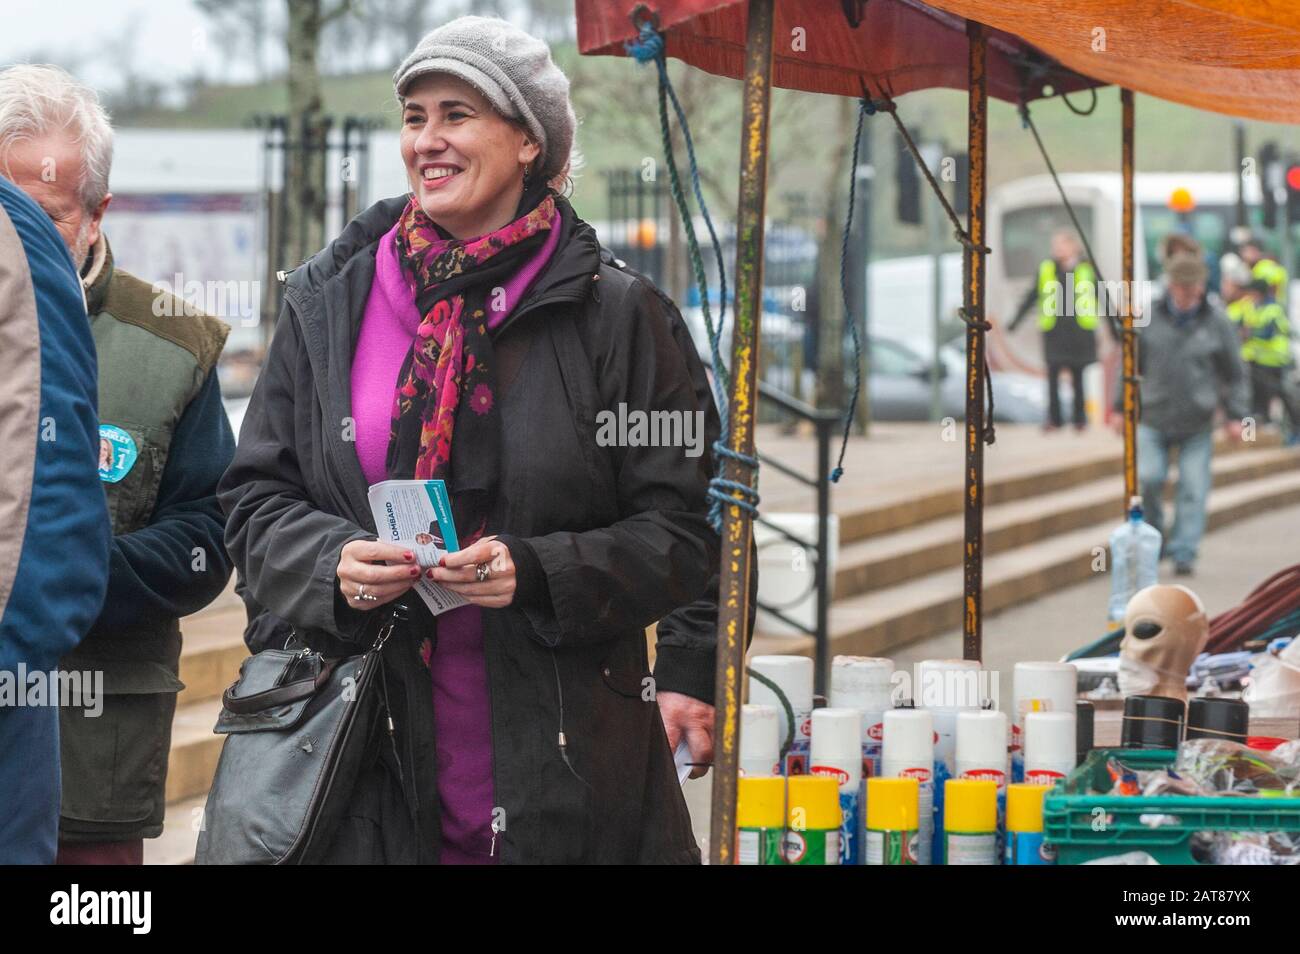 Bantry, West Cork, Ireland. 31st Jan, 2020. Bantry Friday Market was a hive of activity today with 4 general election candidates canvassing the locals. Karen Coakley (FG) was out and about canvassing with her team. Credt Credit: Andy Gibson/Alamy Live News Stock Photo